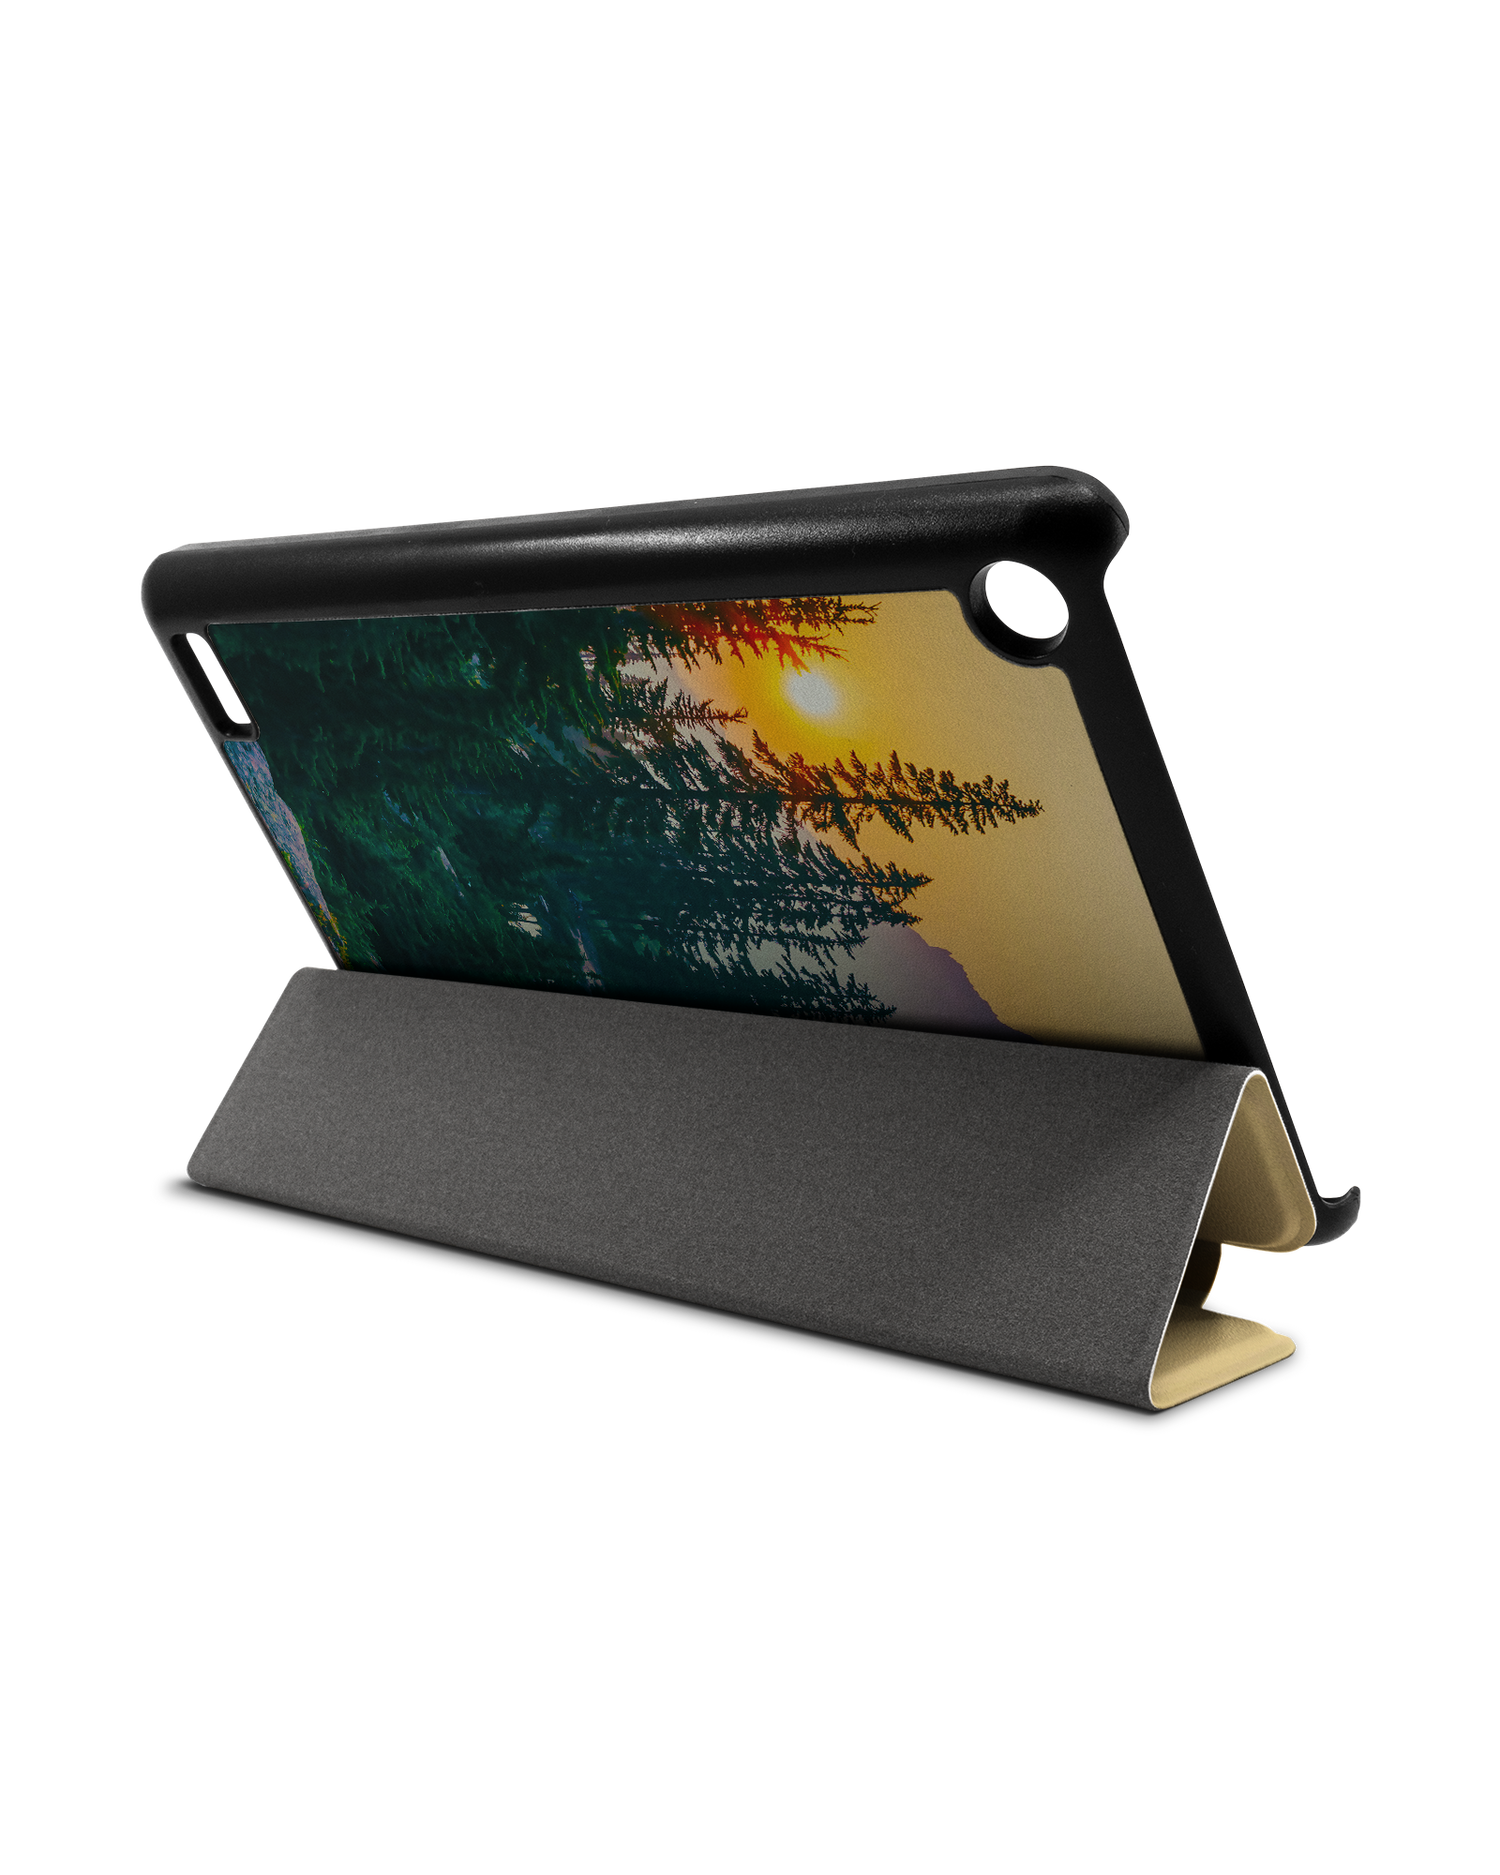 Forest Tablet Smart Case for Amazon Fire 7: Used as Stand